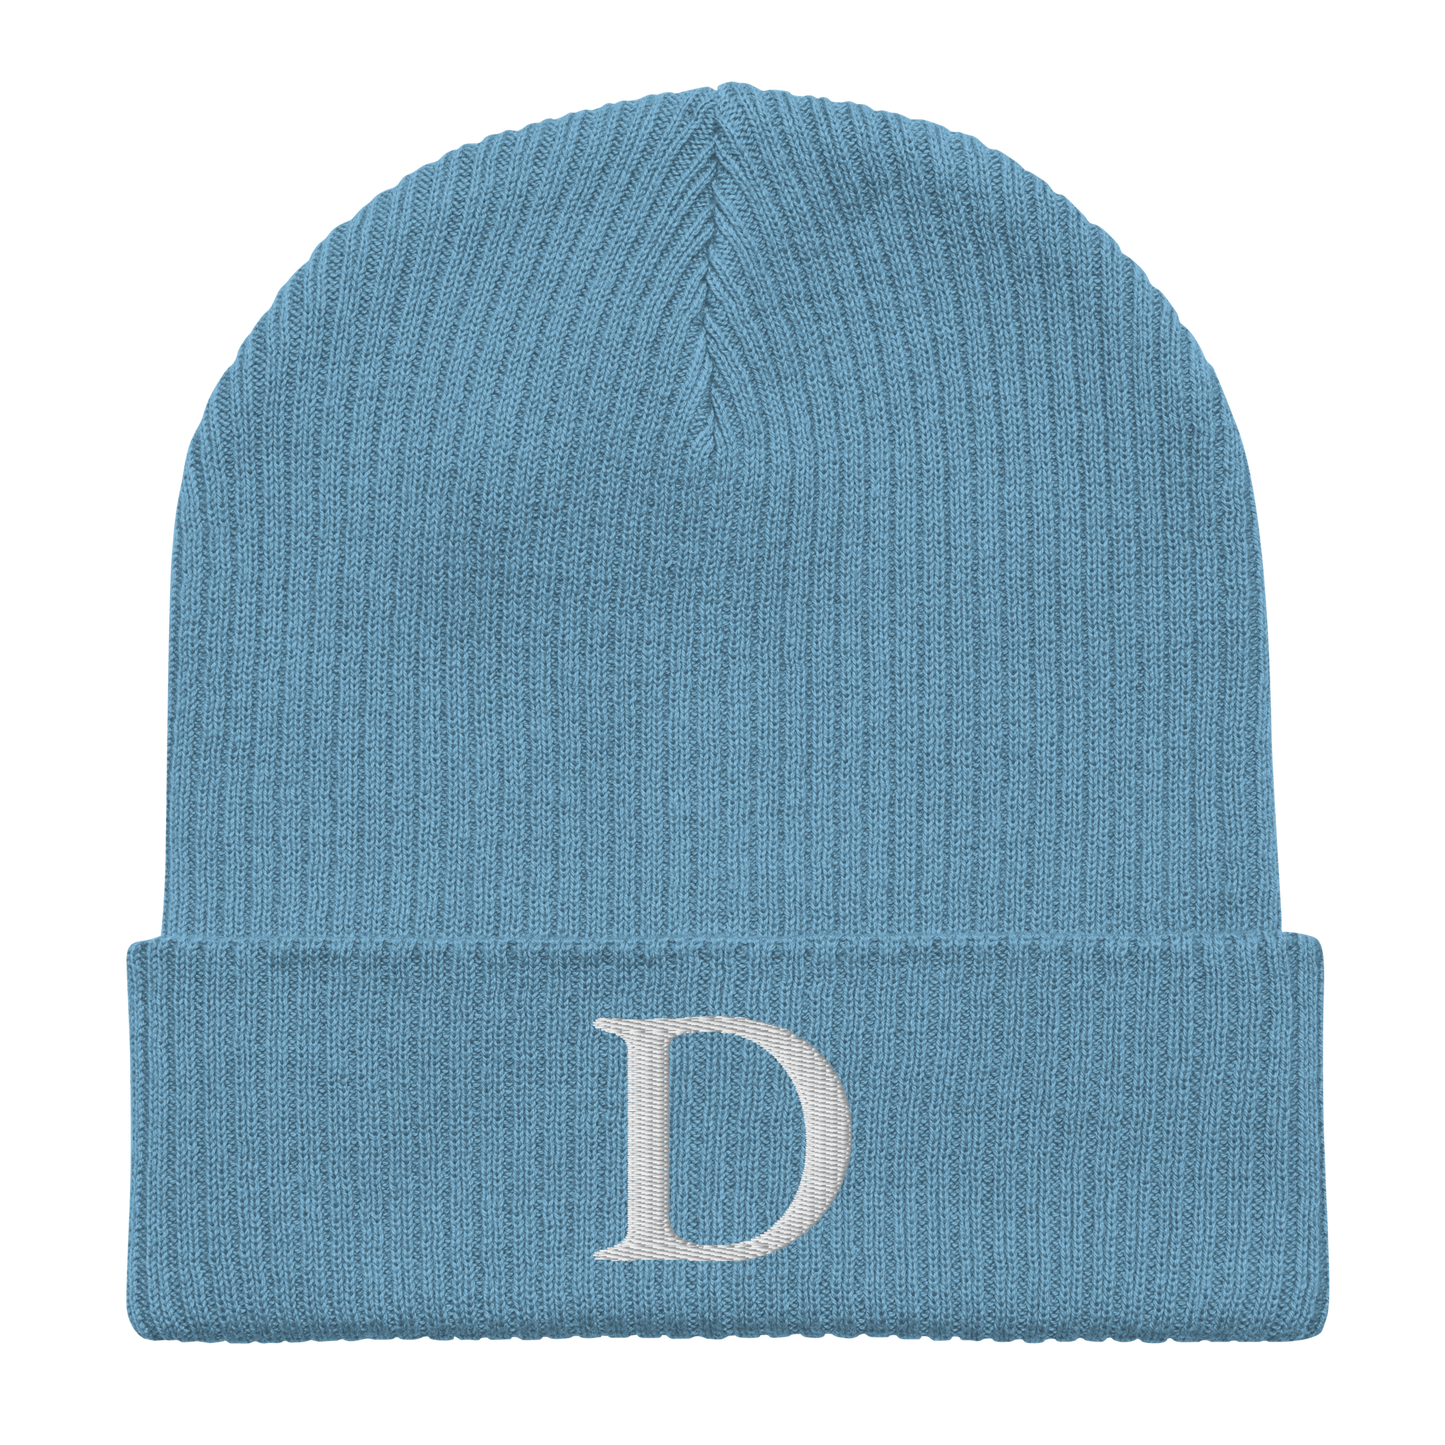 Detroit 'Old French D' Organic Beanie